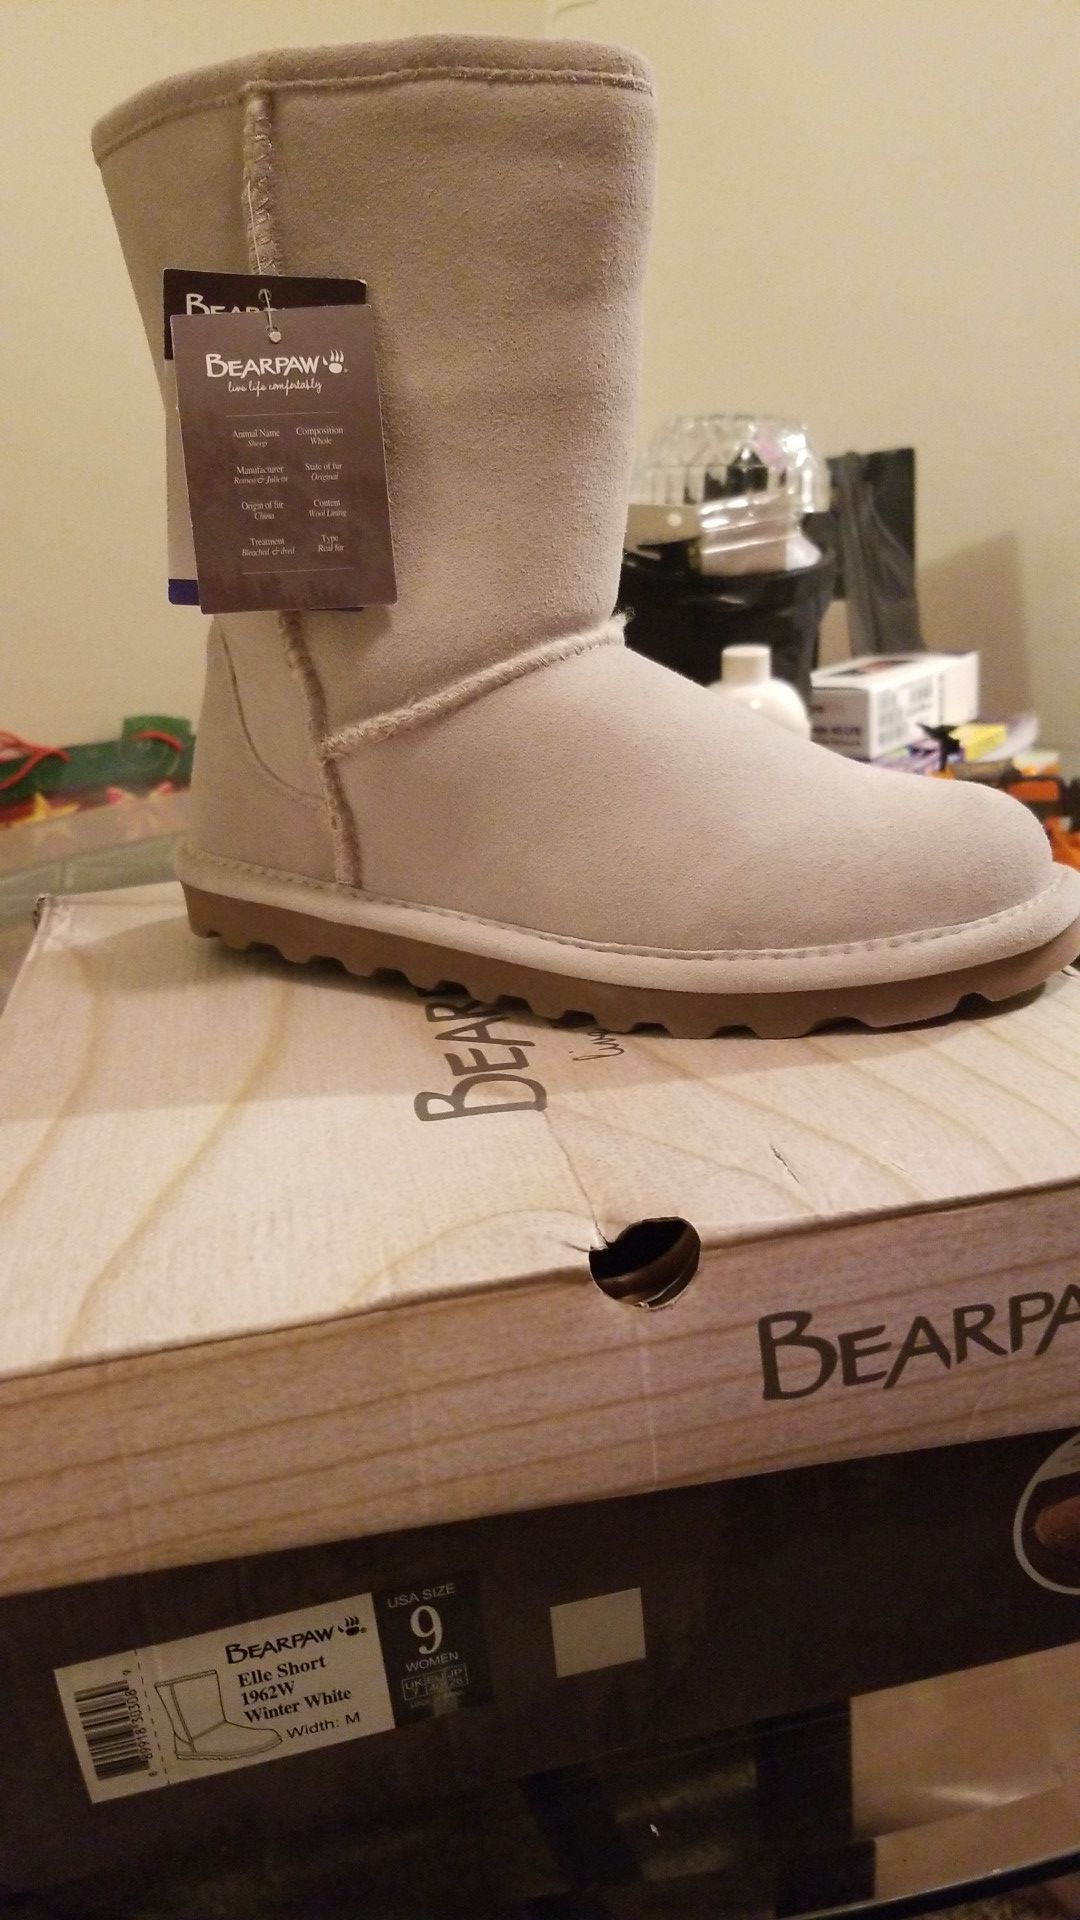 Bear Paw boots